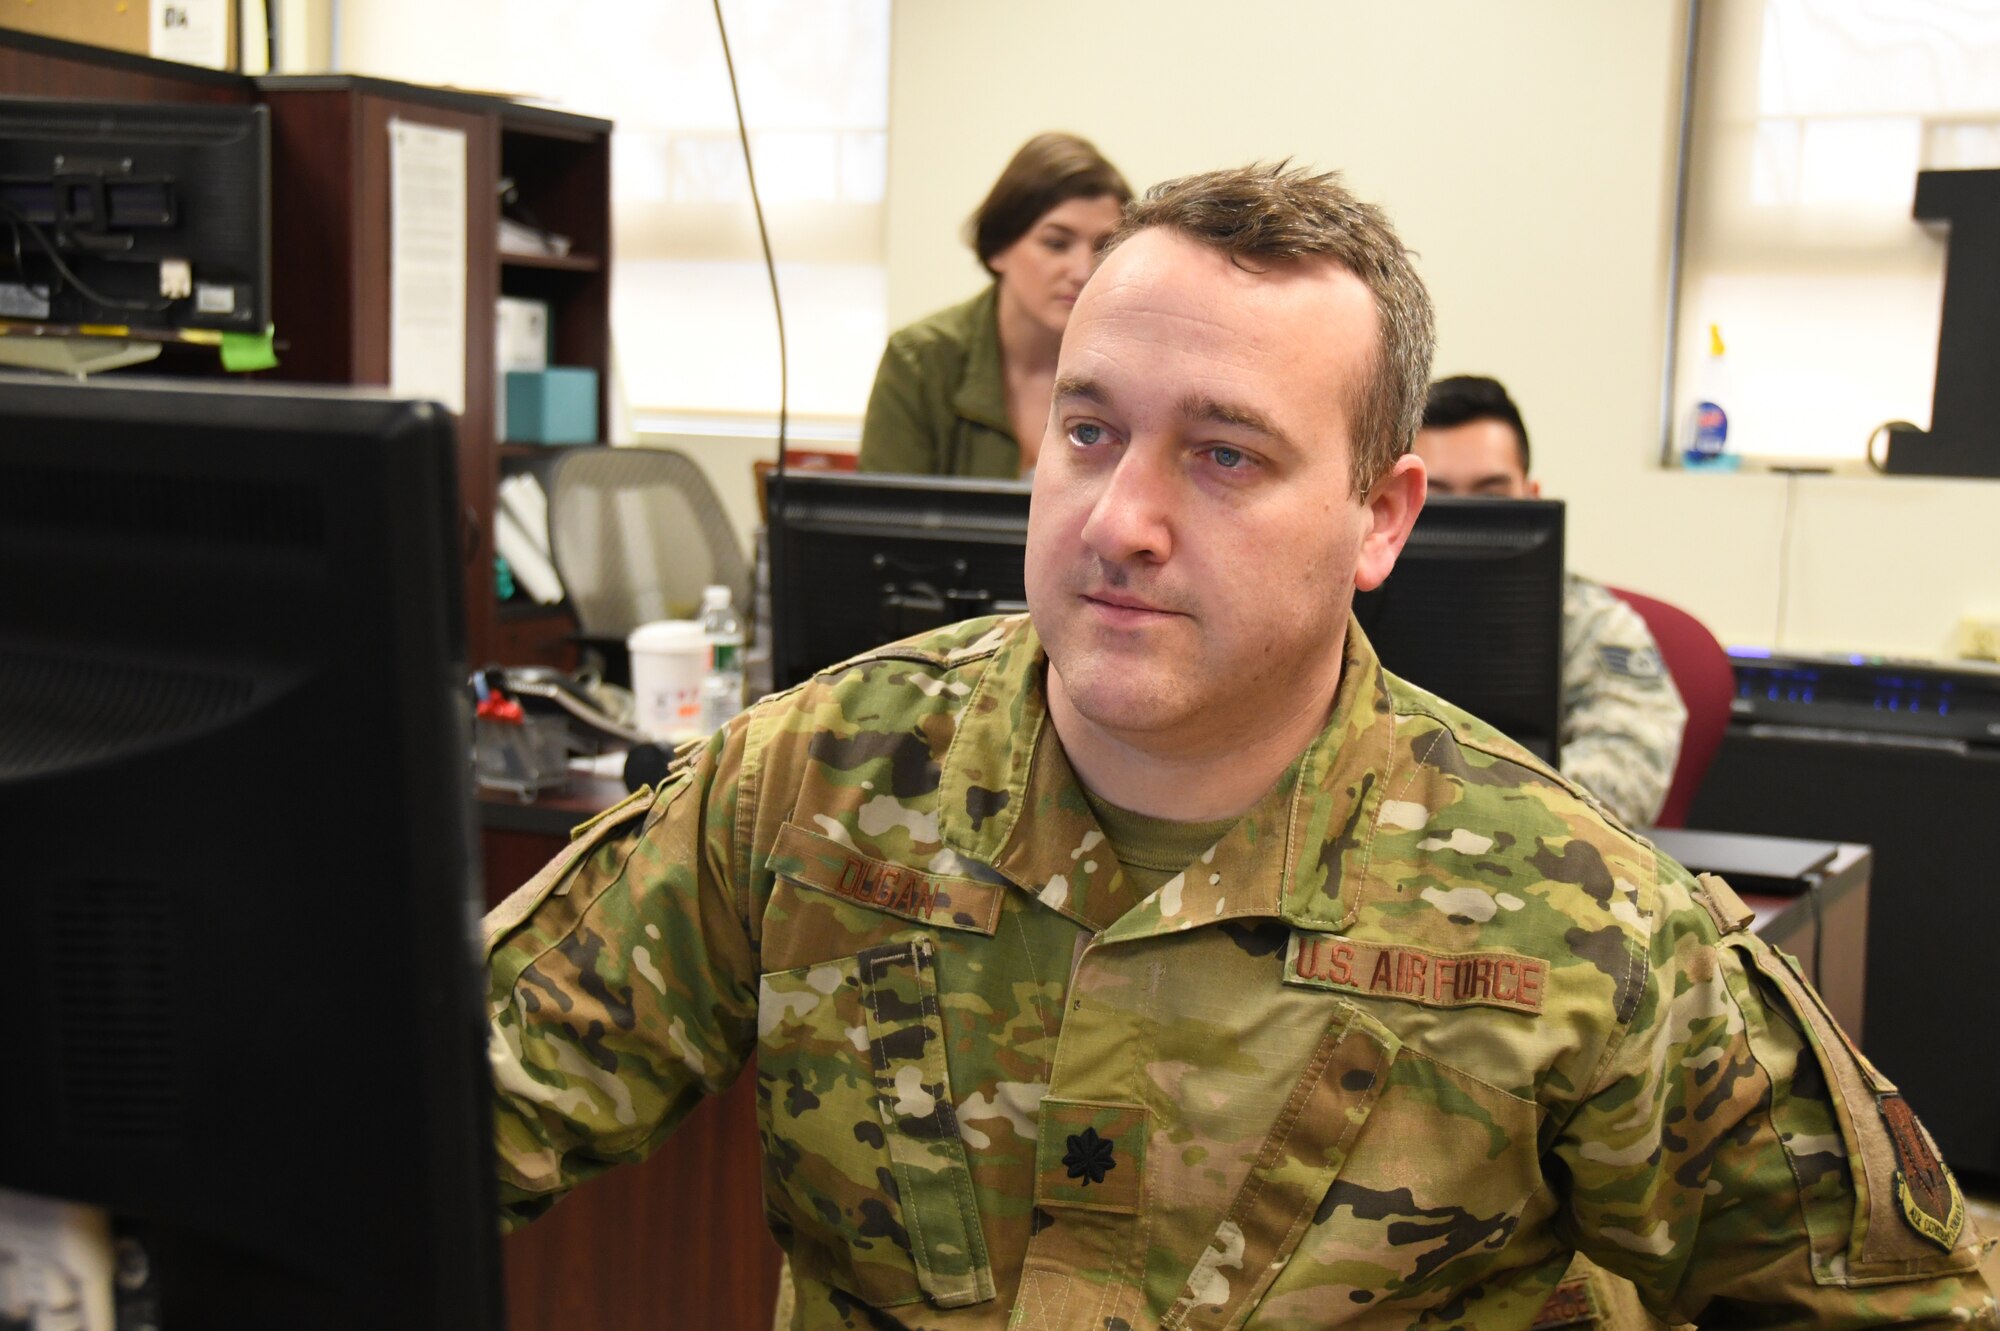 Lt. Col. Jeremy Dugan 104th Fighter Wing Emergency Operations Center commander, monitors, and coordinates with the Emergency Operation Center on critical information requests in response to COVID-19, March 30, 2020. Dugan serves in the Air National Guard in his community of Western Massachusetts. (U.S. Air National Guard Photo by Senior Master Sgt. Julie Avey)